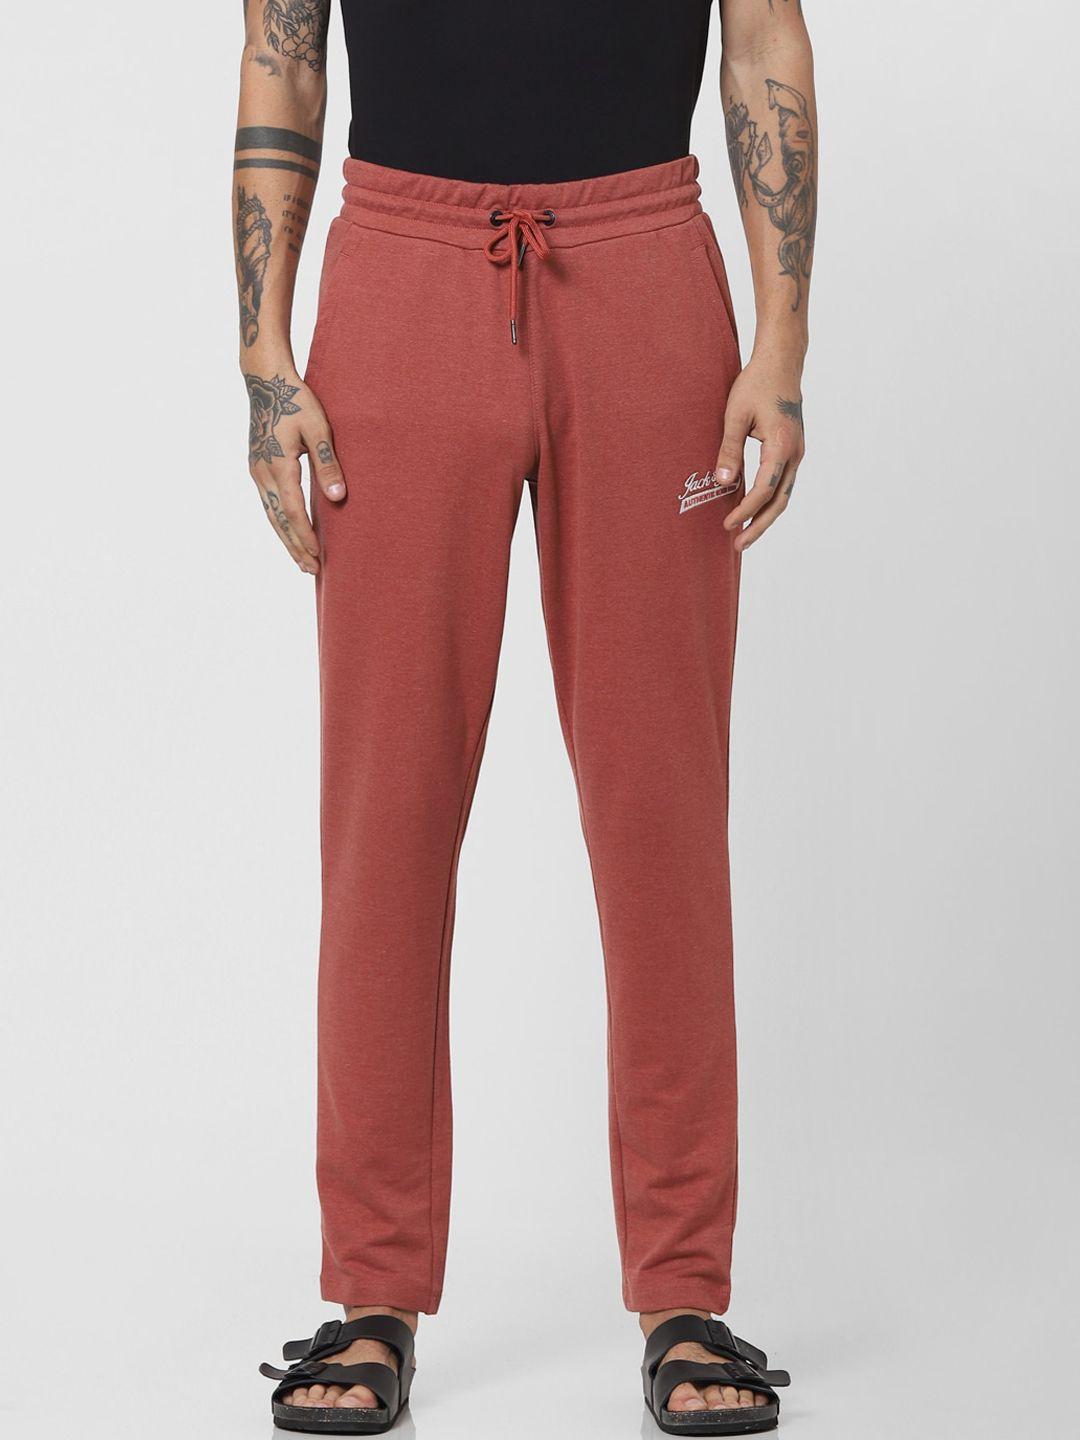 jack & jones men coral red solid pure cotton relaxed-fit track pants